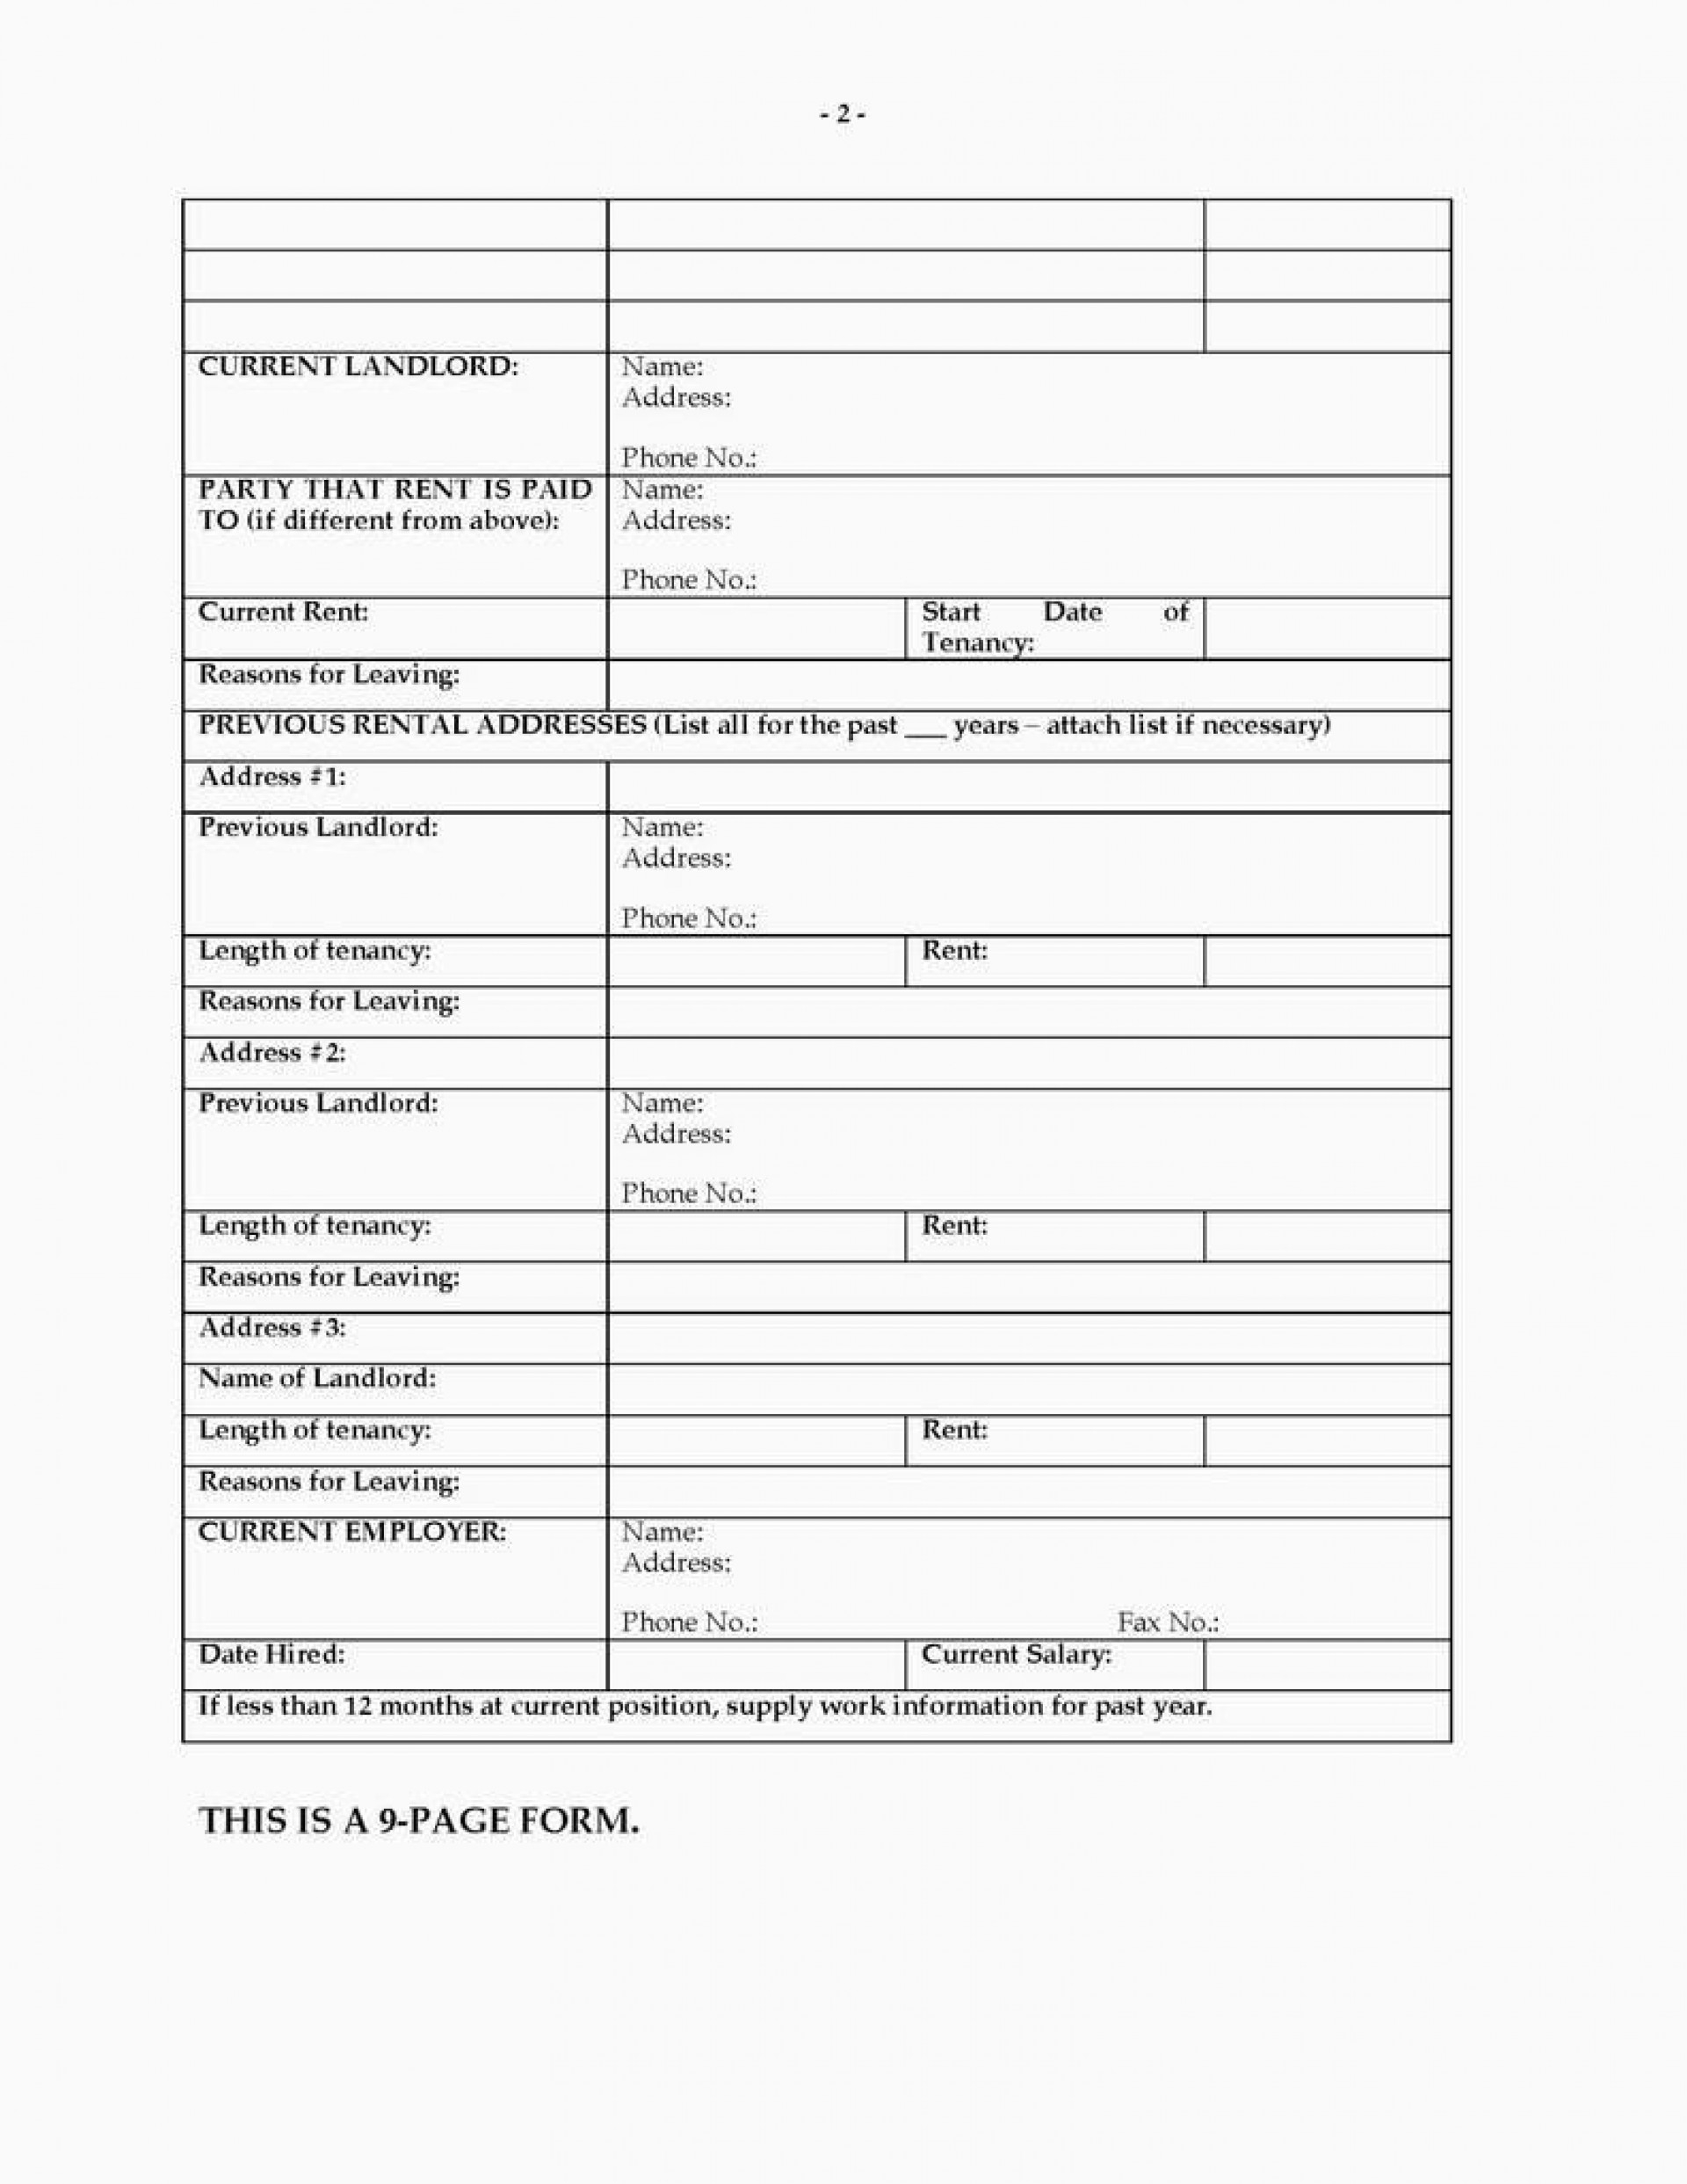 Room Rental Agreement Form Individual Tenancy Application 788x1114ement Contract Template Uk